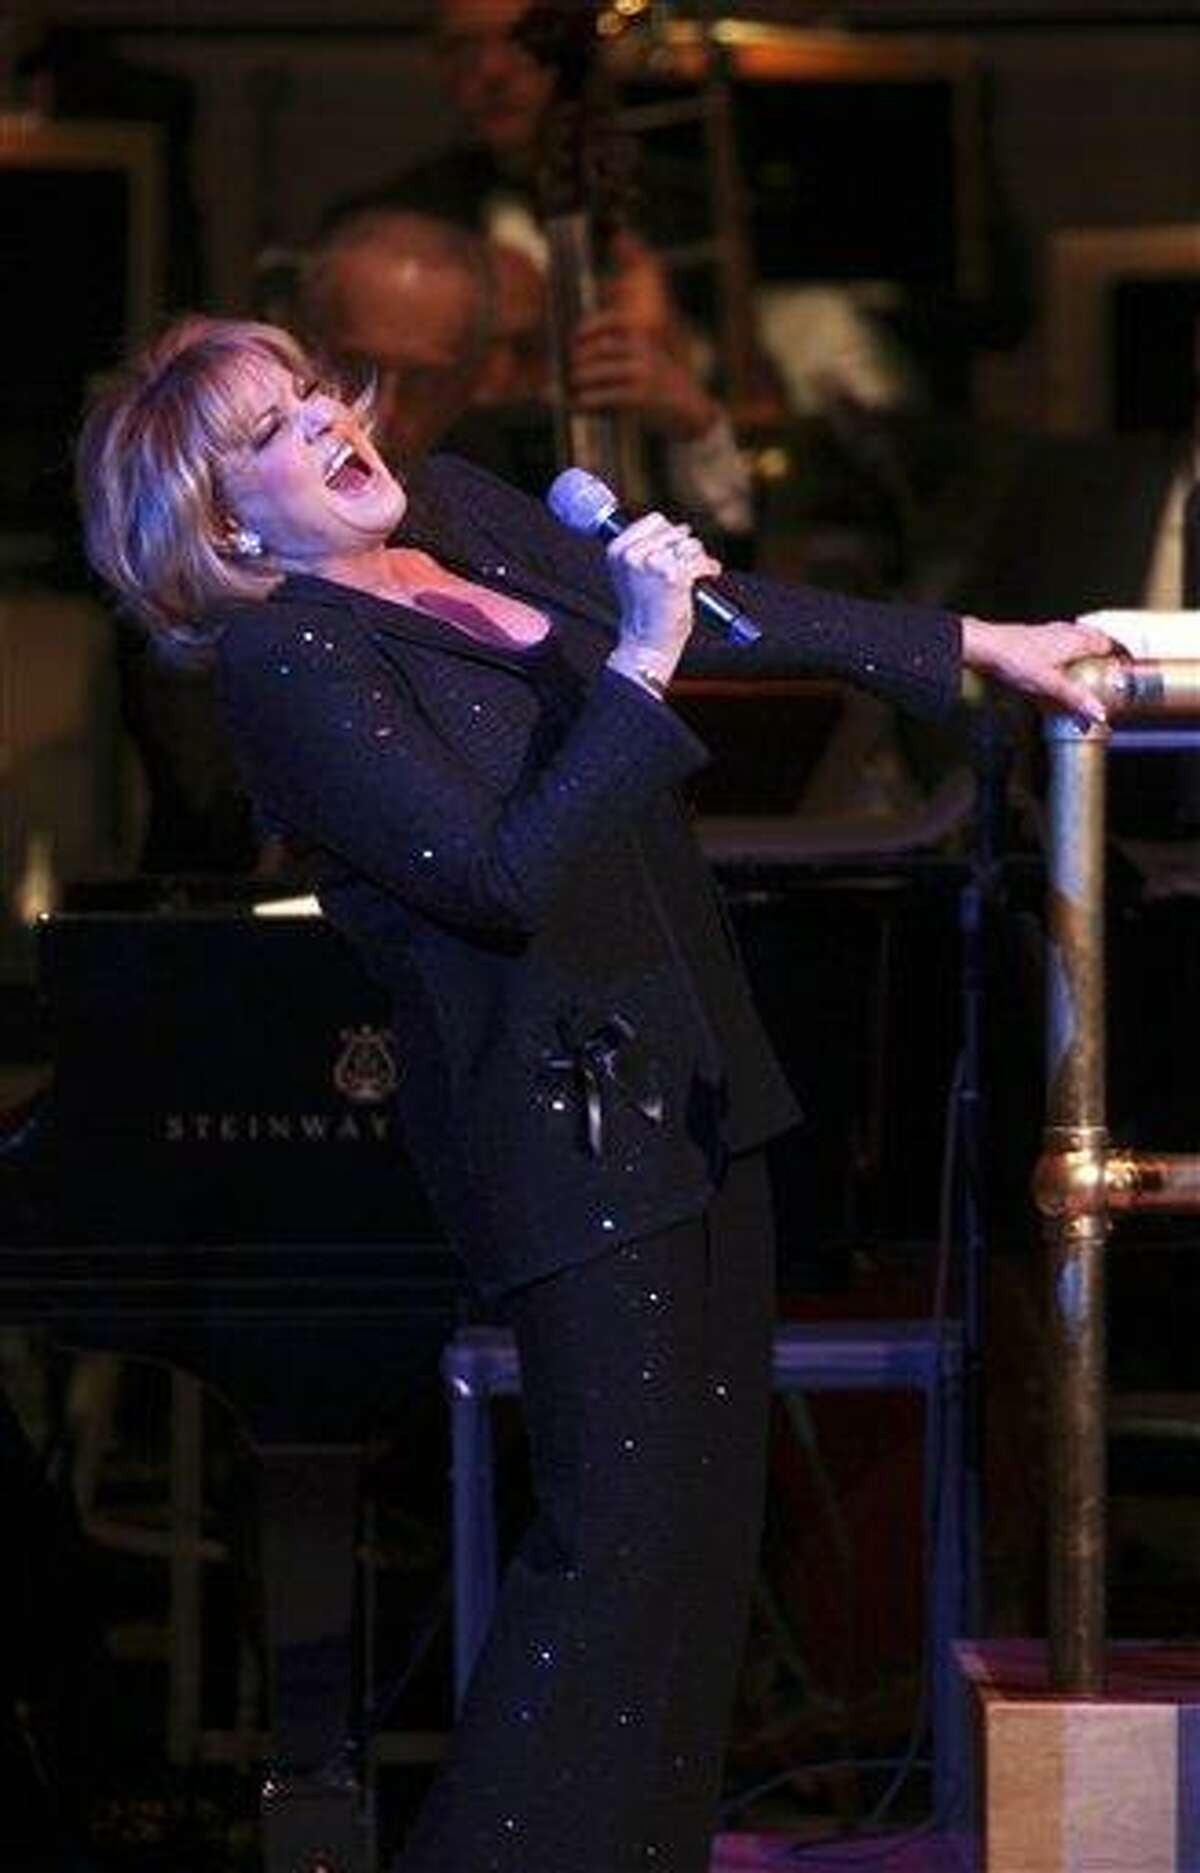 This Friday, March 11, 2011 photo courtesy of Steve J. Sherman for Carnegie Hall shows Lorna Luft, Judy Garland's daughter, as she sings with The New York Pops during a performance honoring Garland at Carnegie Hall in New York. They performed "Over the Rainbow," "The Trolley Song," "The Man That Got Away," and other songs from Garland's 1961 Carnegie Hall performance. (AP Photo/Carnegie Hall, Steve J. Sherman)